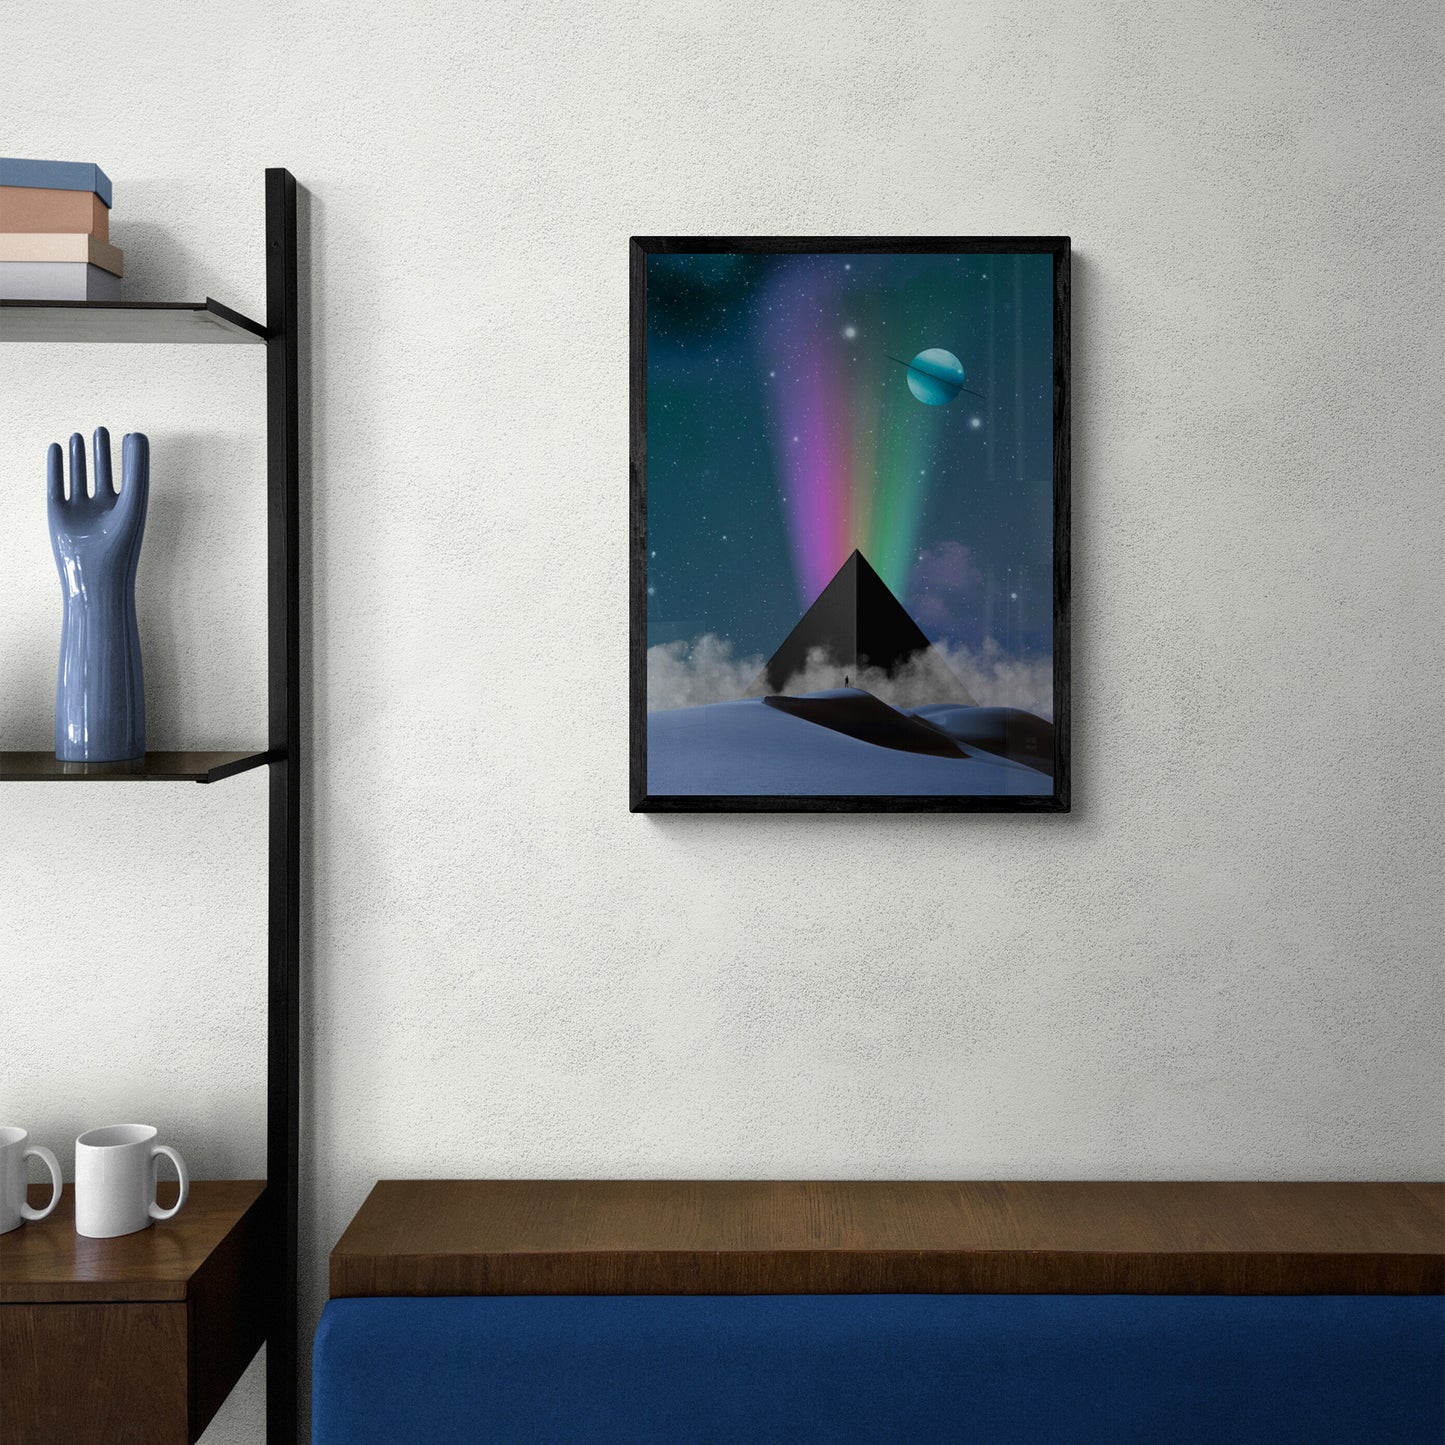 Blue Dunes Pyramid 18X24 Inch Poster Print for Pyramid & Surreal Art Fans, great gift for home decor and room design.